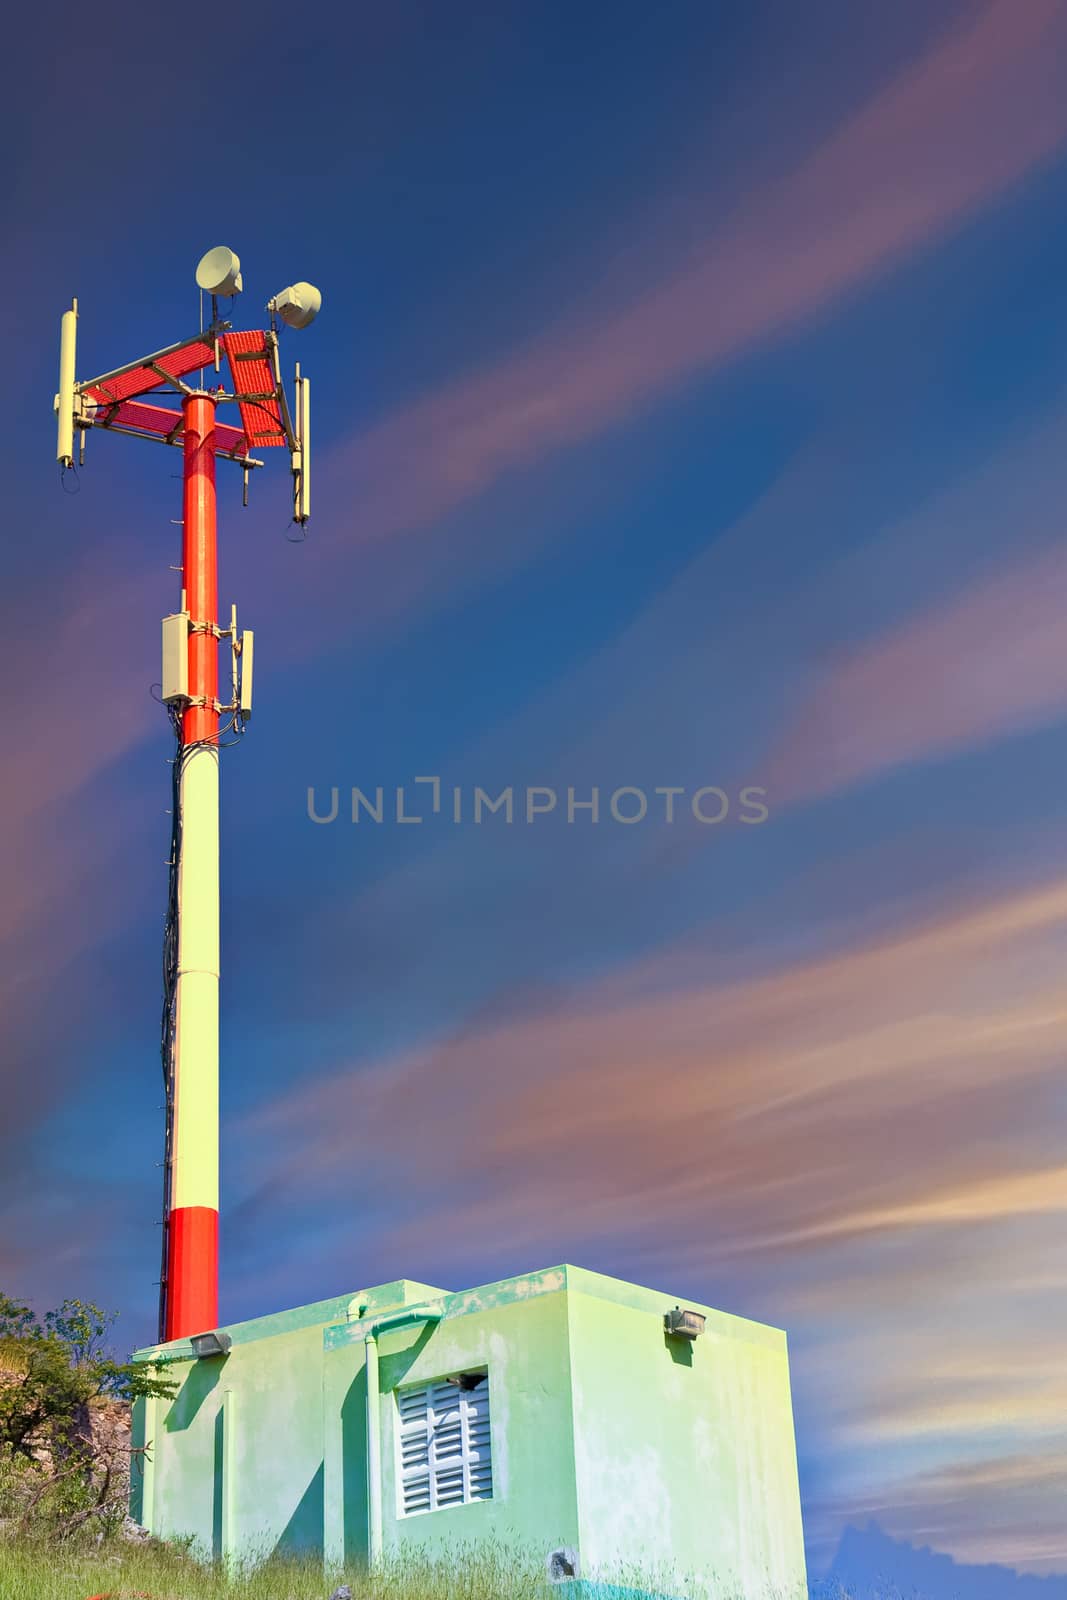 A red and white cell phone tower on a rocky hill by an old shack